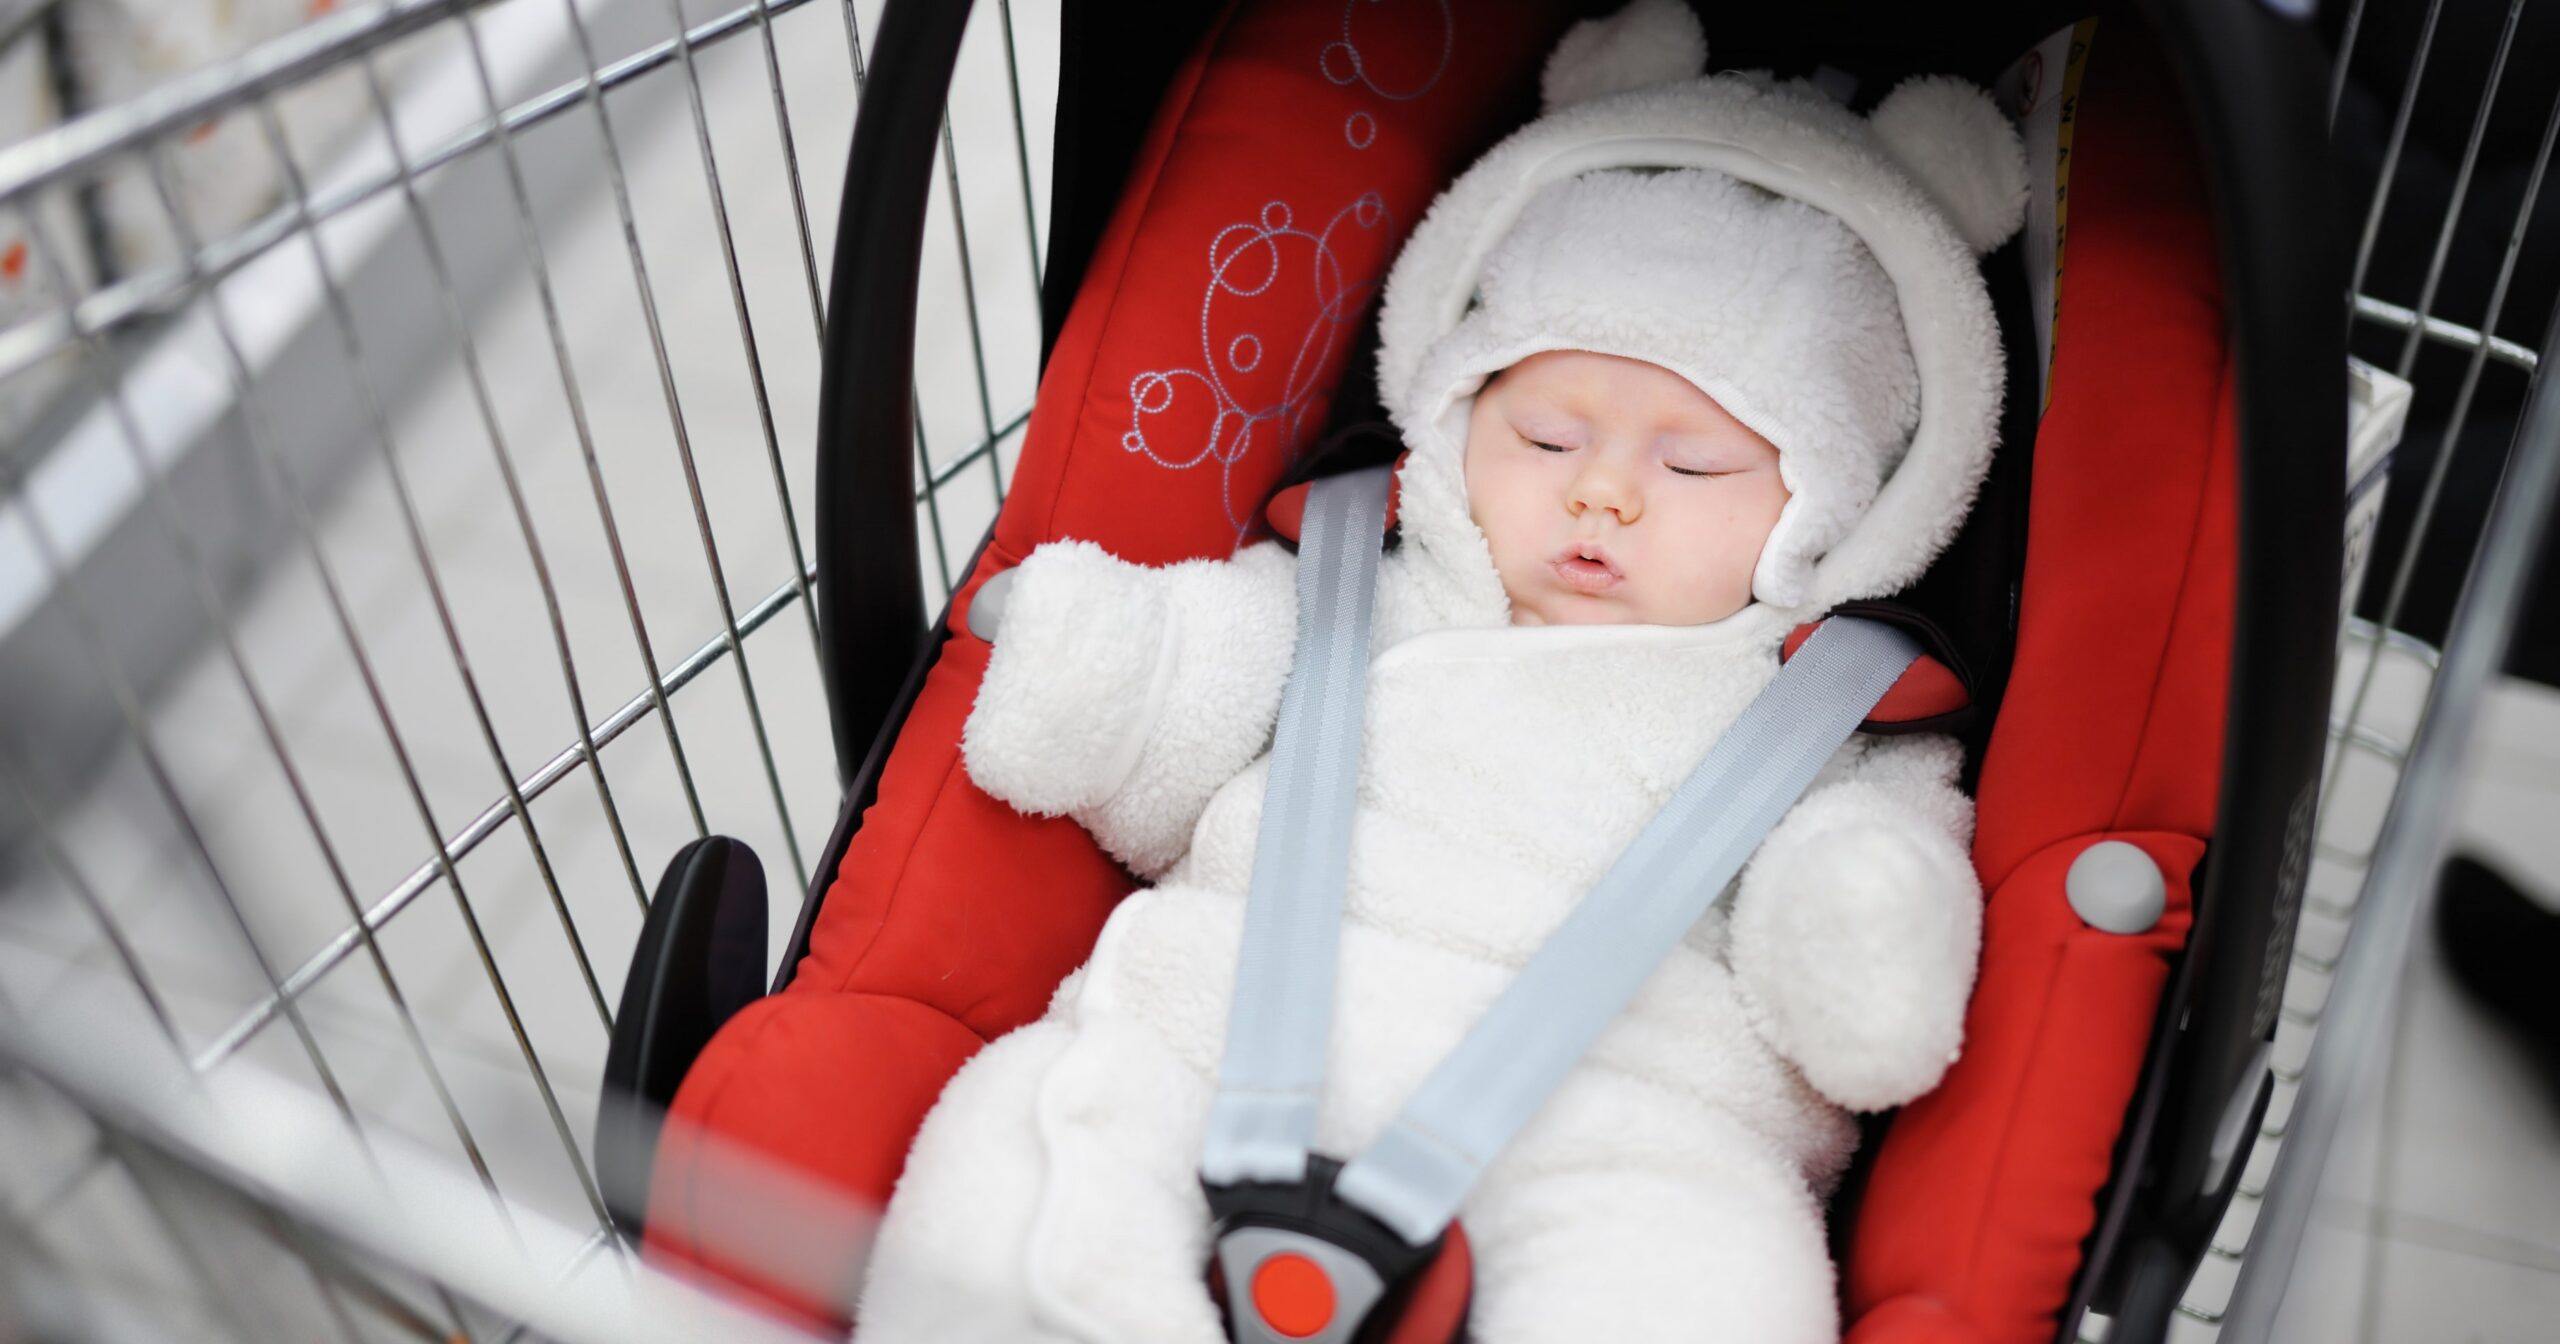 How To Put A Car Seat On A Shopping Cart